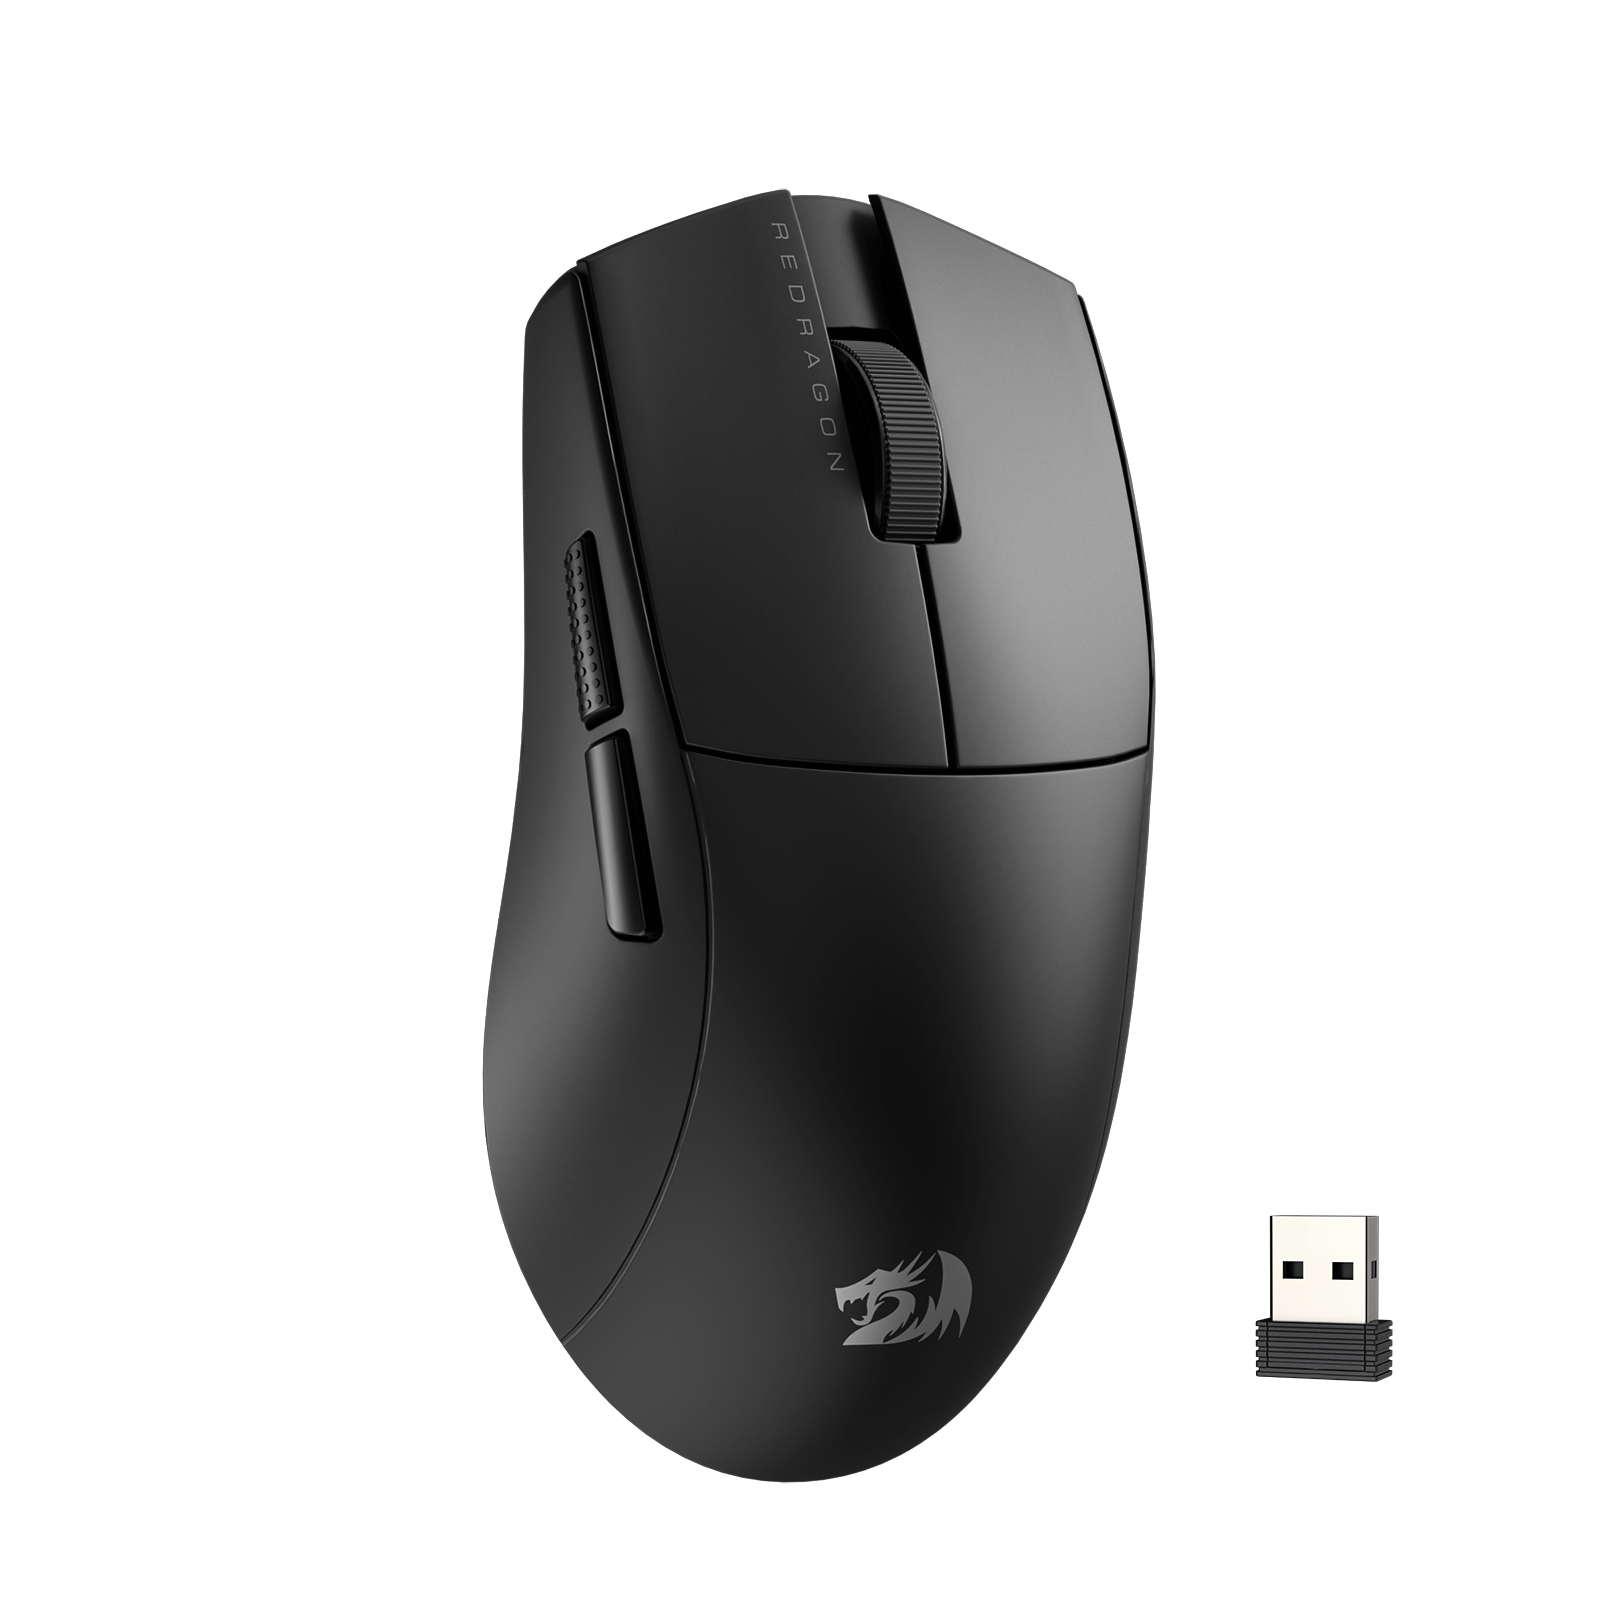 Redragon M916 Wireless Gaming Mouse, 49G Ultra-Light 8K DPI 2.4G Wireless Gaming Mouse w/Ergonomic Natural Grip Build, Full Programmable Buttons, Software Supports DIY Keybinds & DPI | show